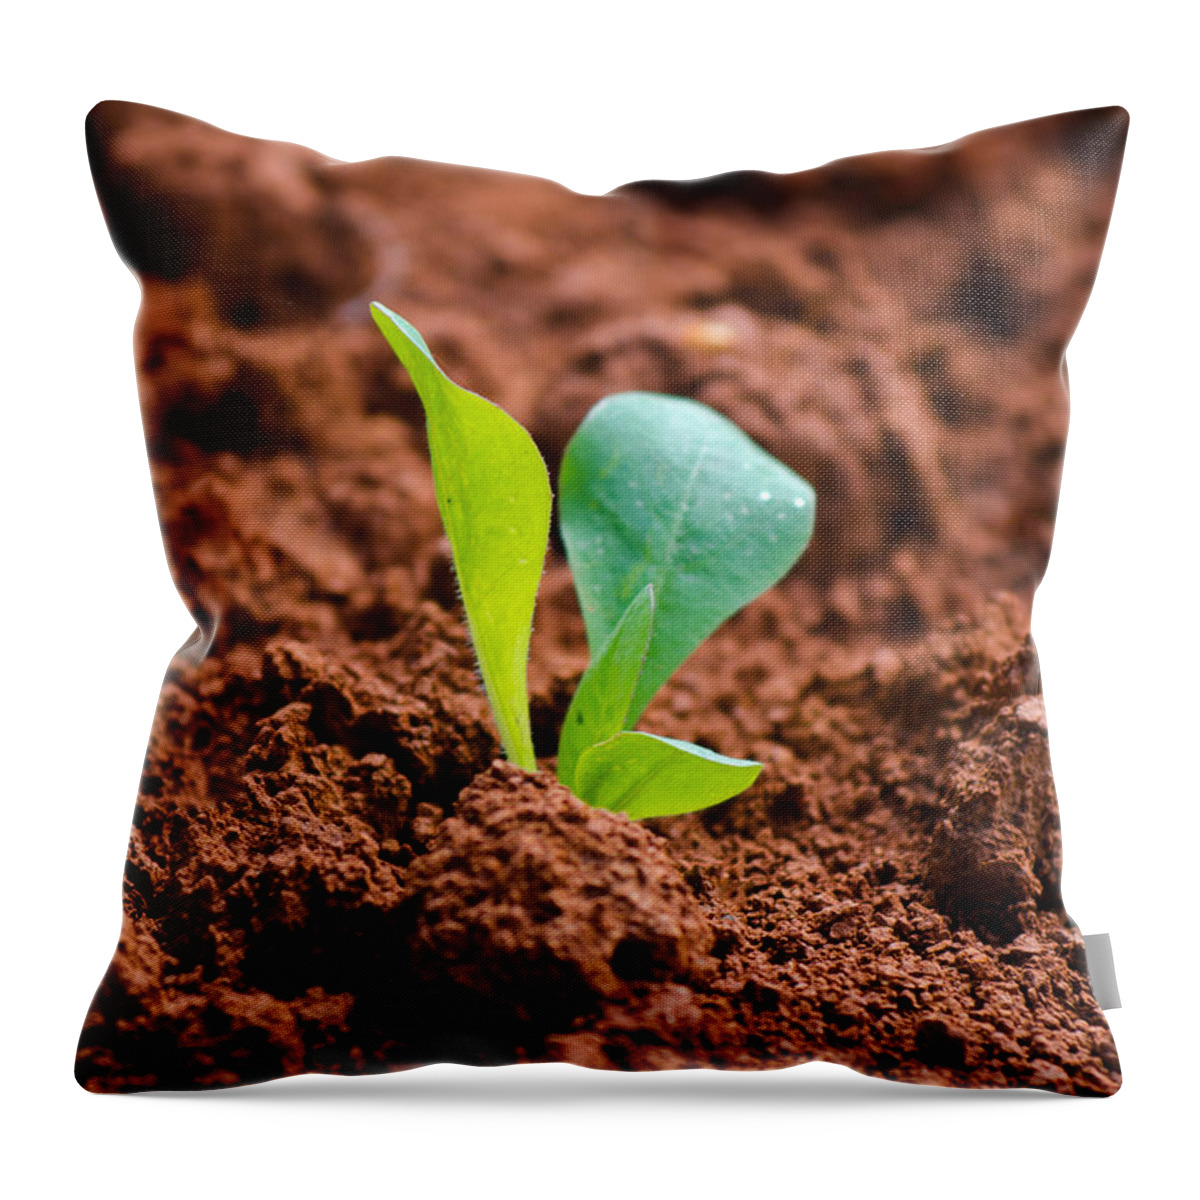 Plant Throw Pillow featuring the photograph Newborn Plant On Red Acre by Andreas Berthold